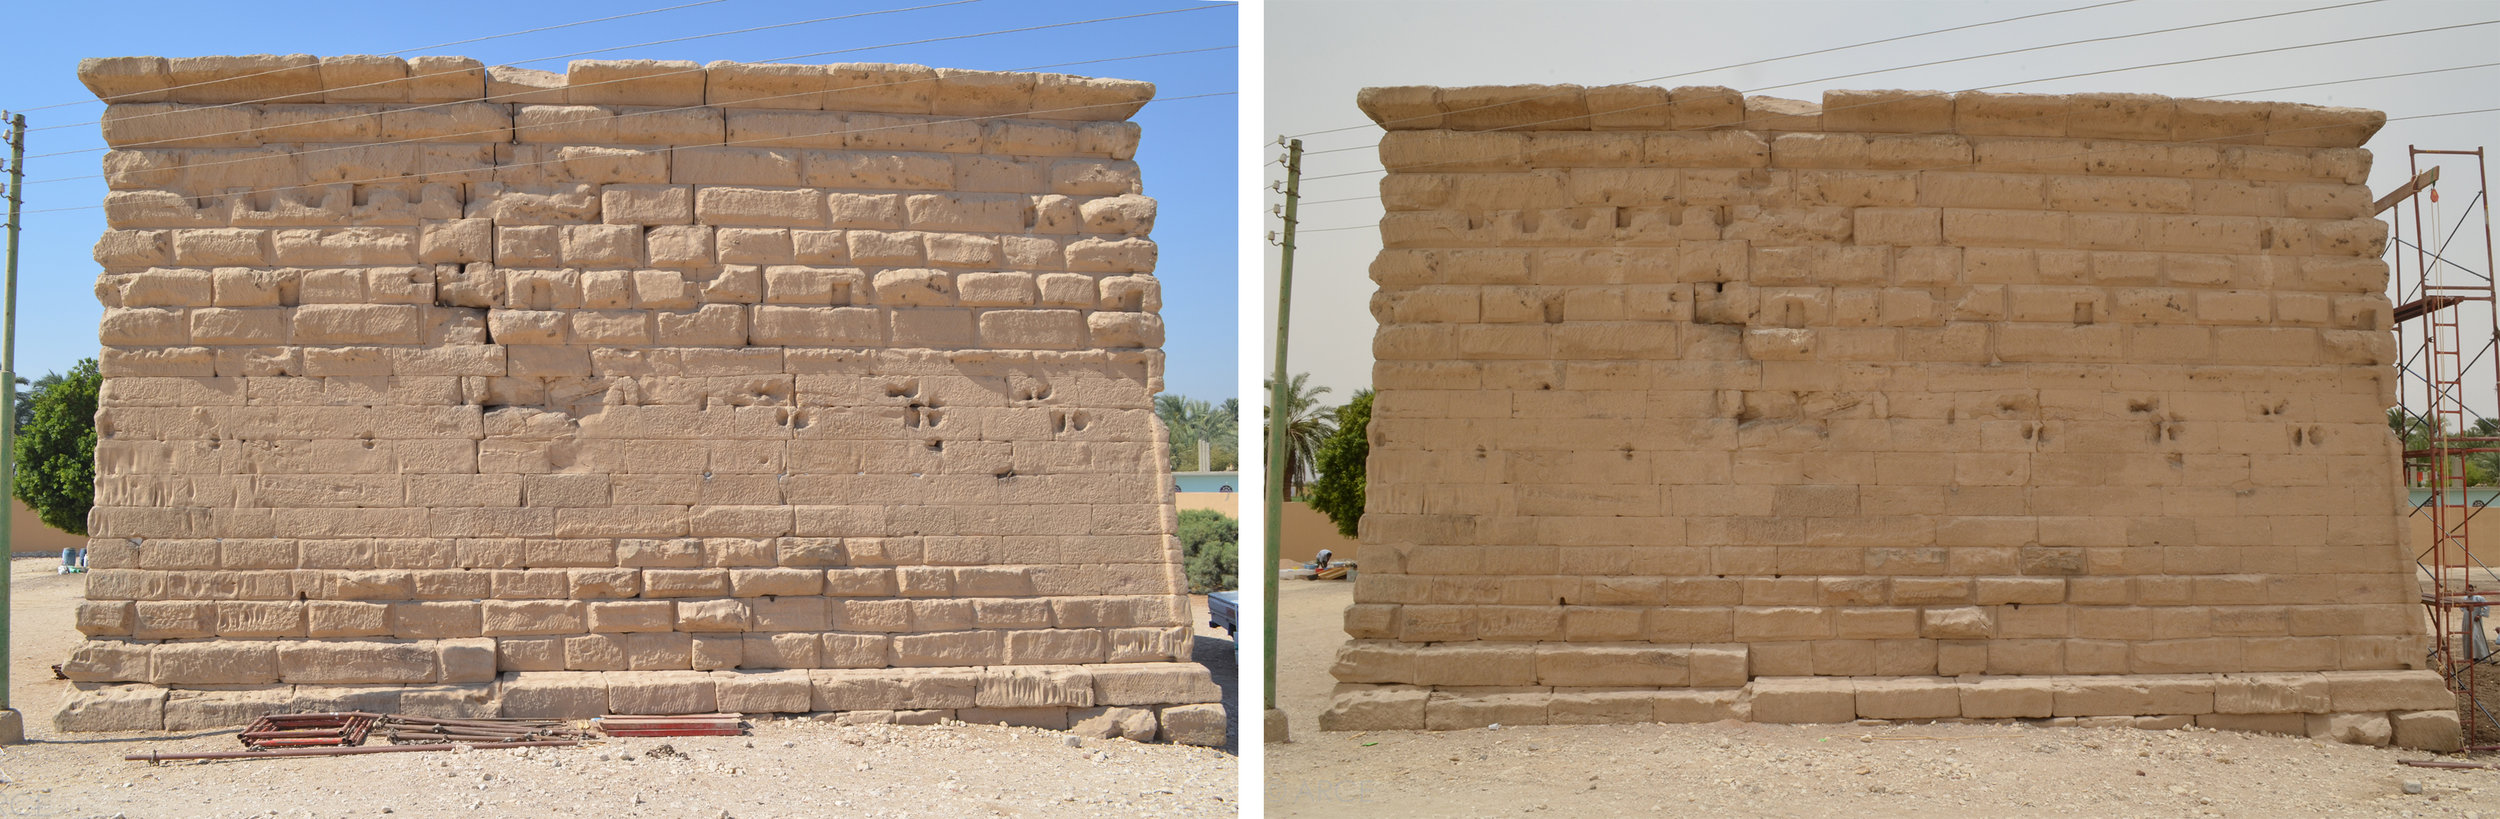  Repointing and filling of the temple’s exterior cracks with a tailor-made lime mortar. The north facade is pictured before (left) and after (right) repointing.&nbsp;  Image © ARCE, 2012&nbsp; 